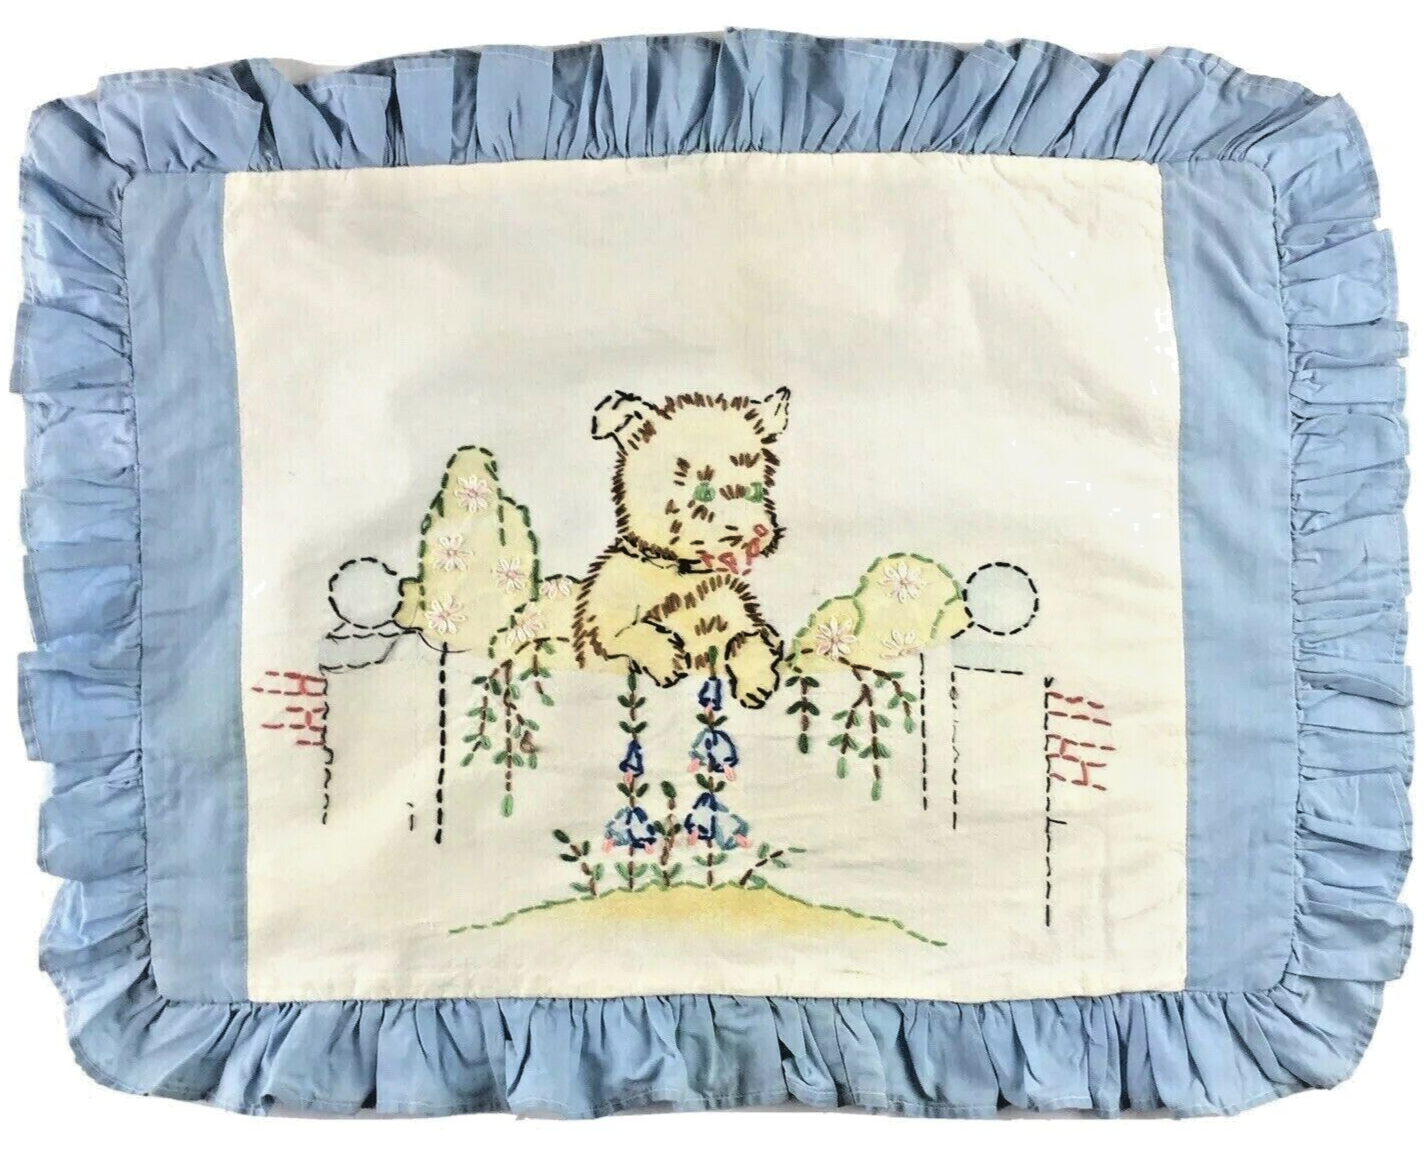 Primary image for Vintage Puppy Dog  Pillow Sham  Handmade Embroidered Cottage Garden Ruffle Edge